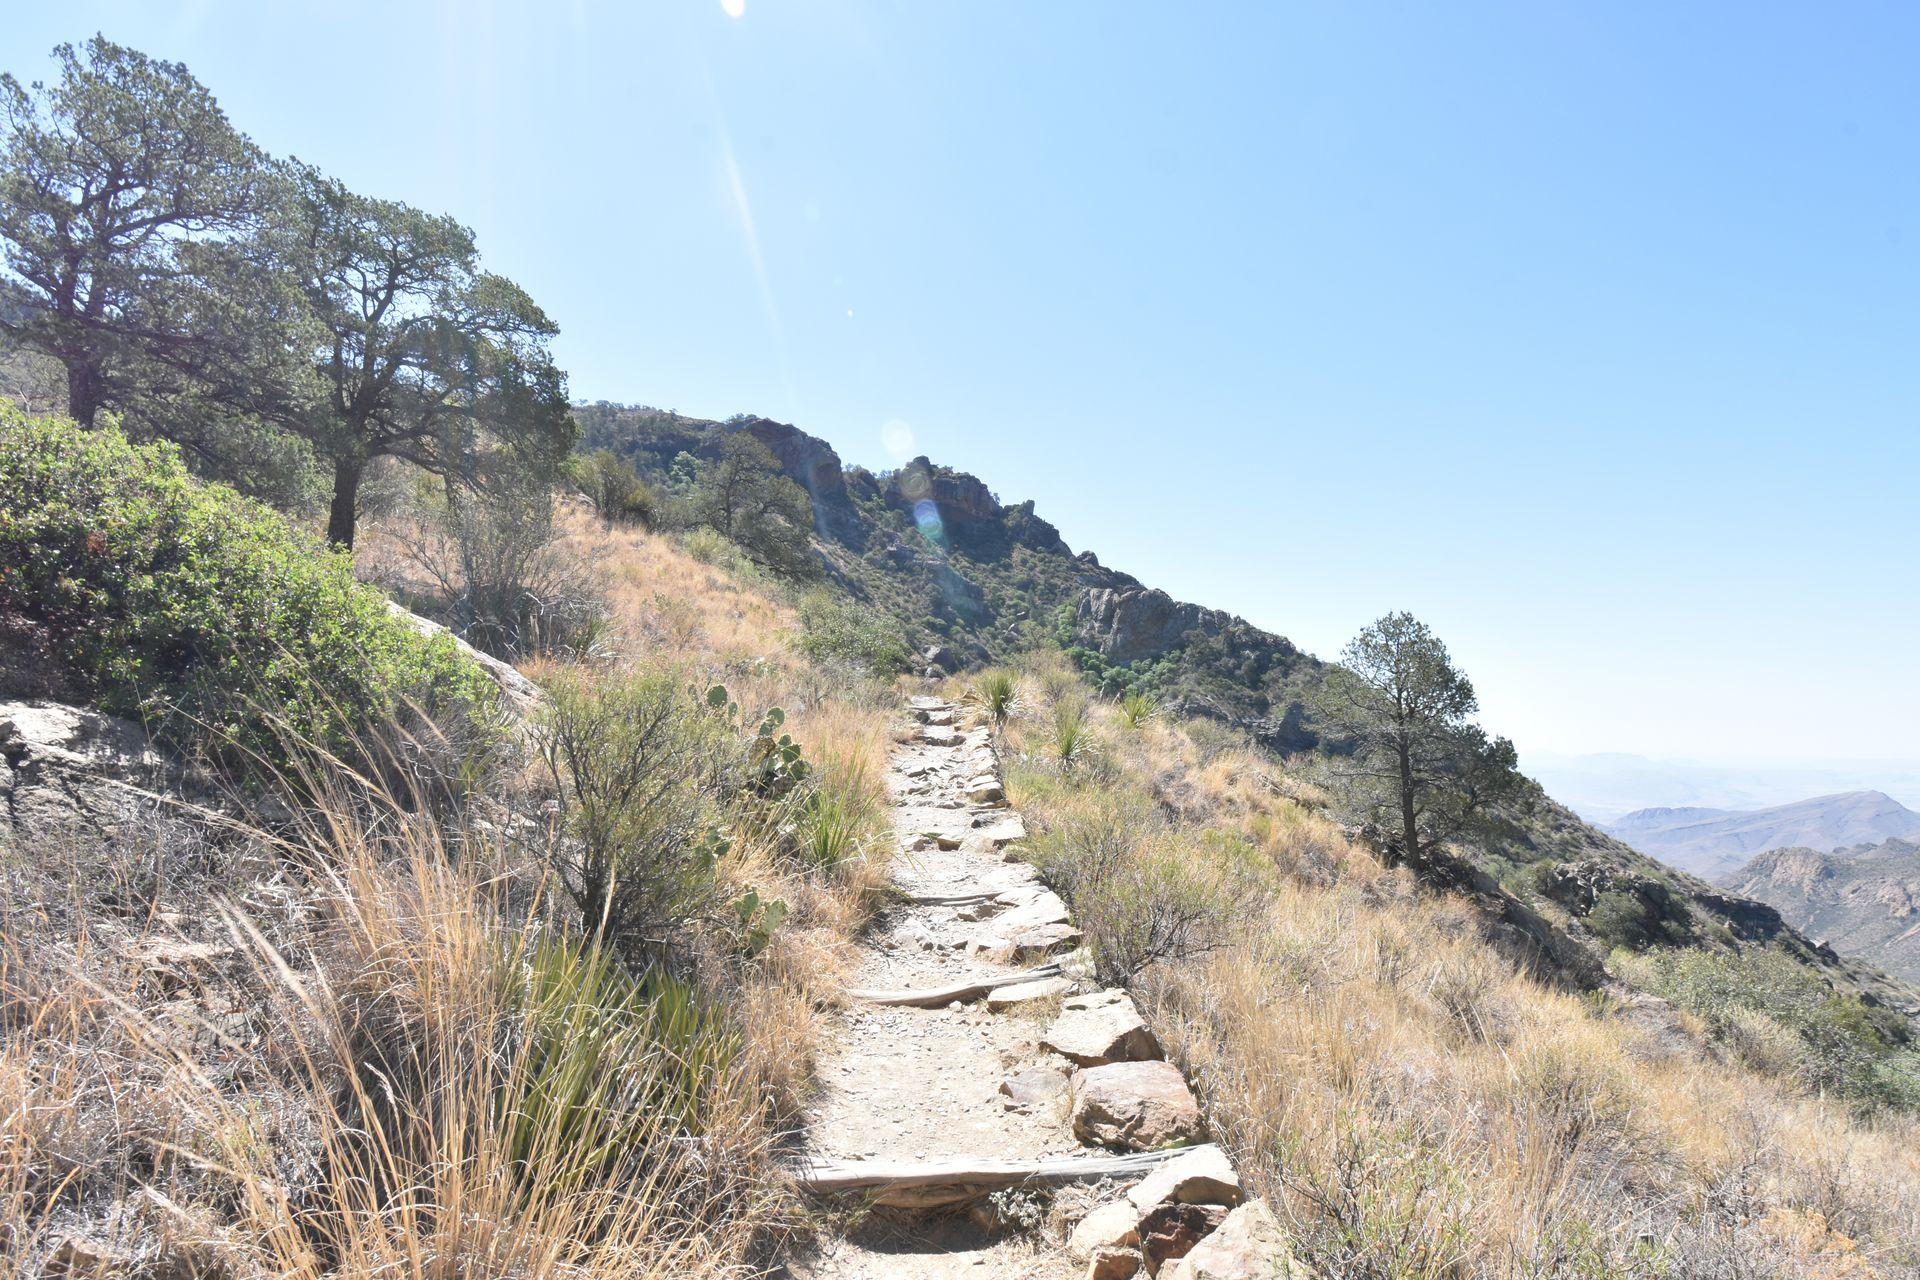 The Lost Mine trail. A rocky trail leads up the side of a mountain and is surrounded by tall grasses.